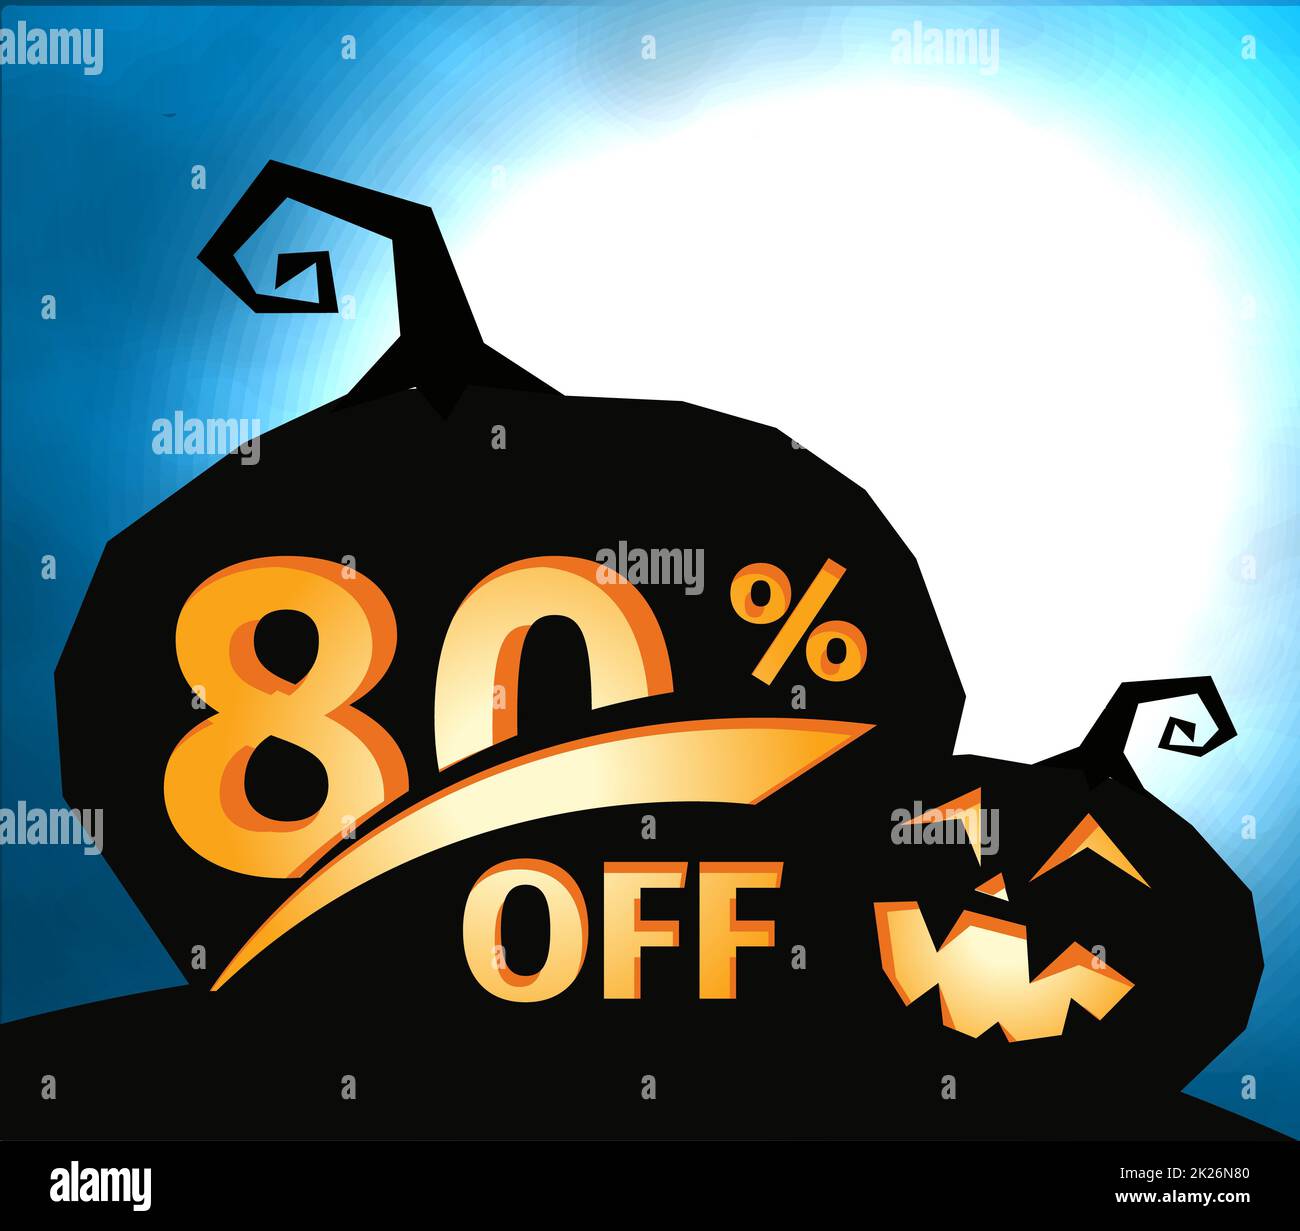 Pumpkin silhouette on dark blue sky with full moon. Halloween 80 percent off, sale banner. Holiday offer, autumn discount vector illustration. Stock Photo